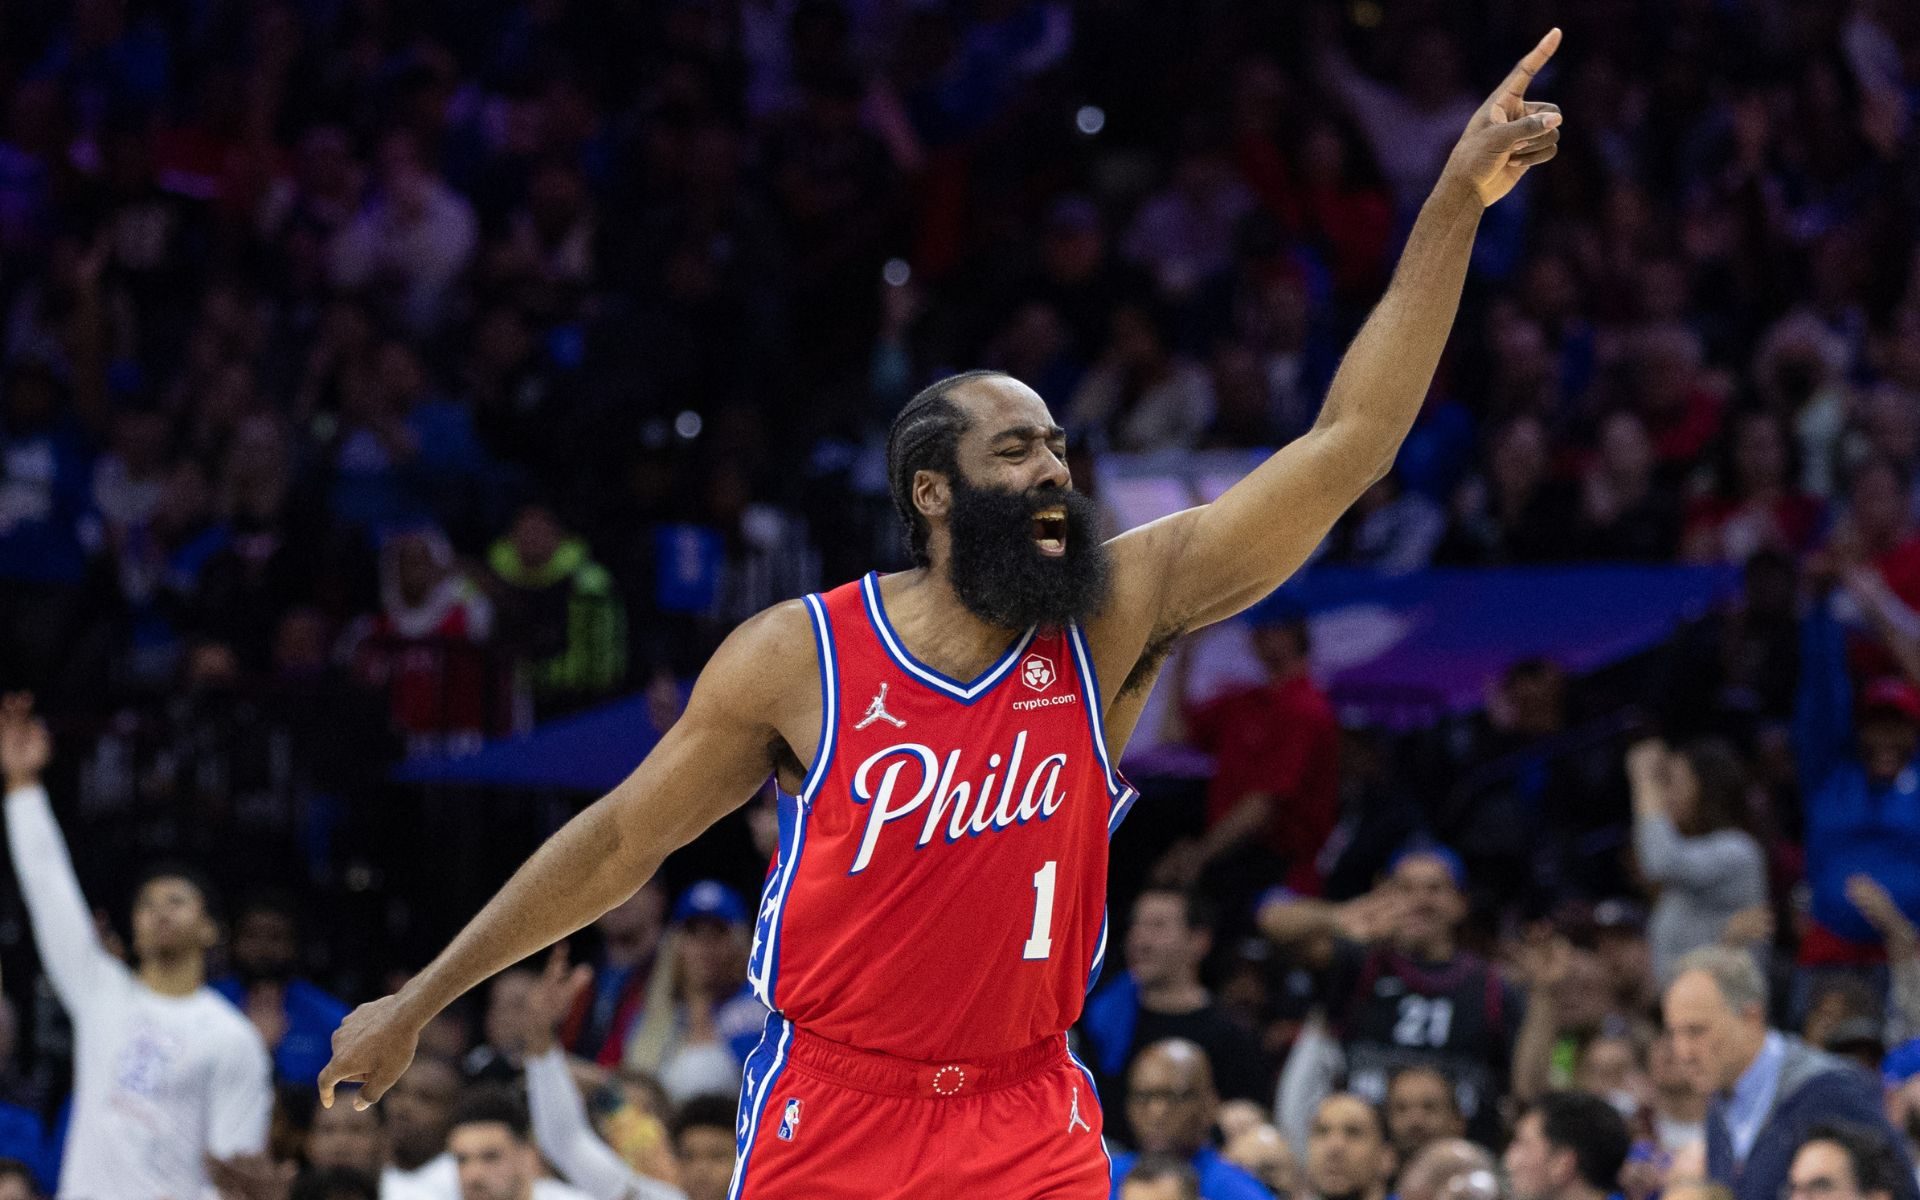 harden jersey number sixers